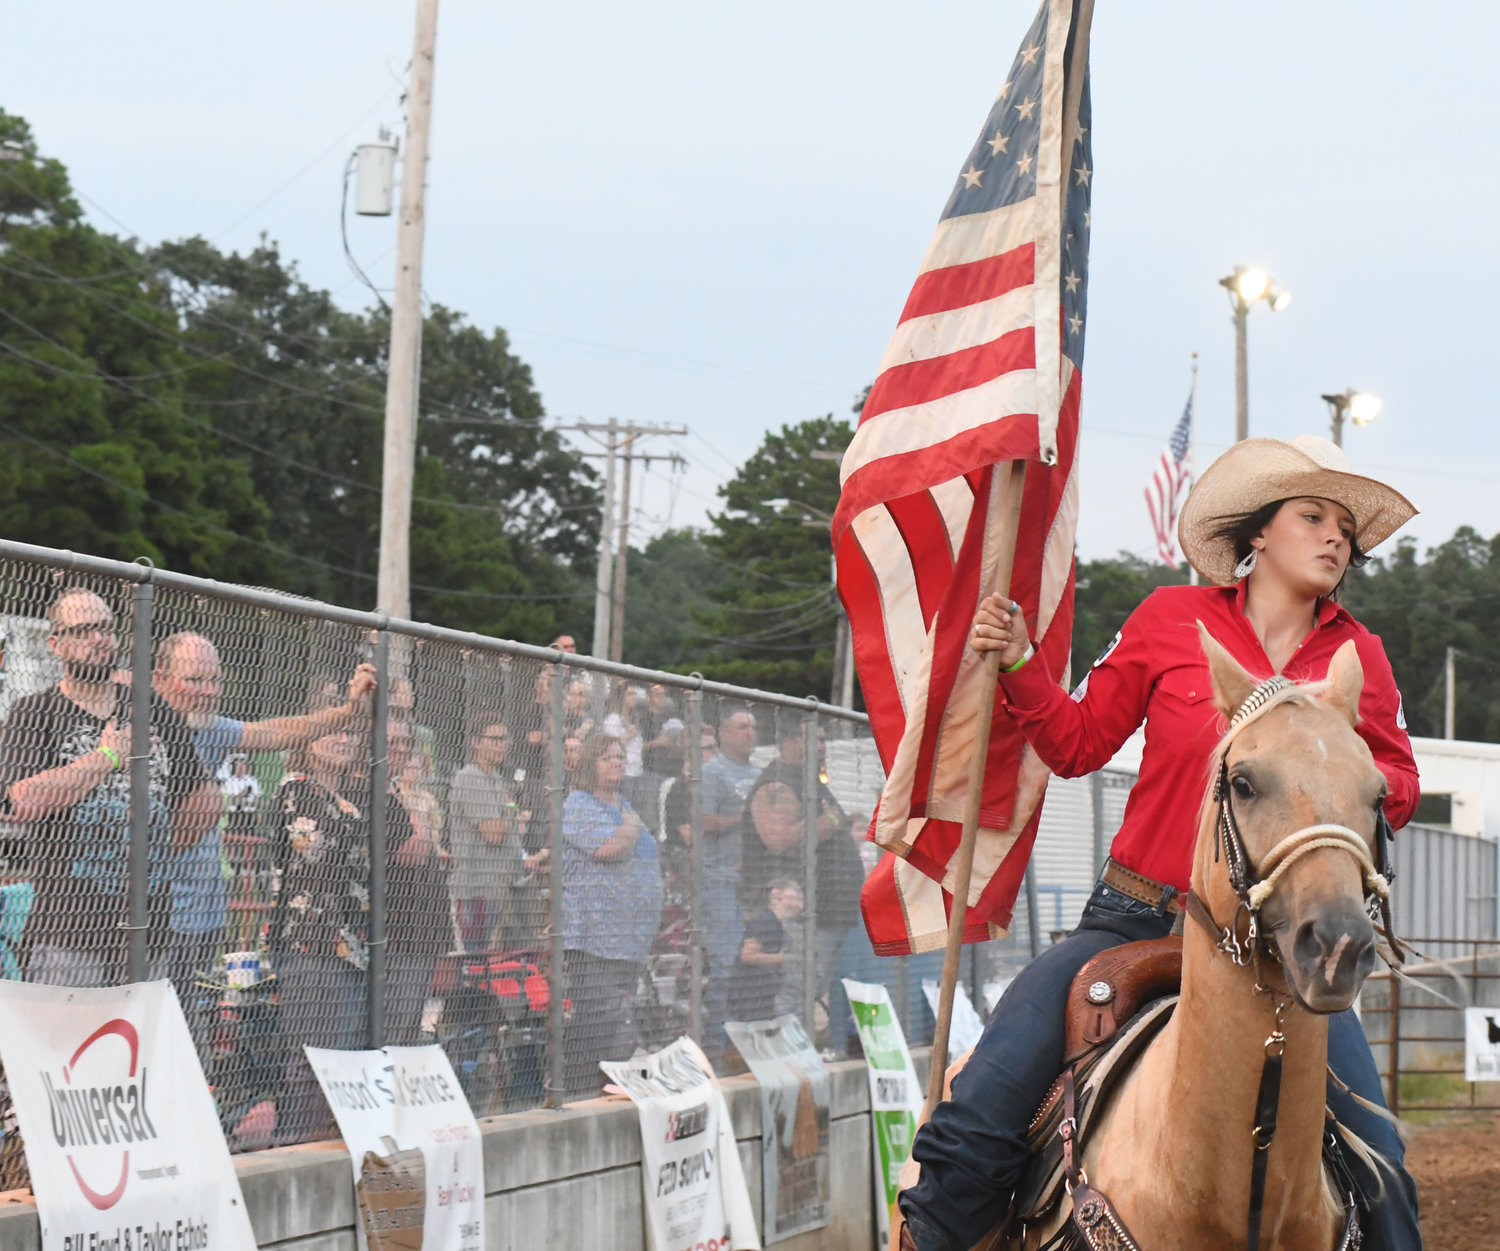 Makayah Alexander, a barrel racer from Lebanon, Mo., circles the Memorial Park arena Friday evening during a patriotic opening ceremony for the Double B Rough Stock Association’s rodeo hosted by the Owensville Fire Department.  She won the Saturday competition of the of the open barrels event during the rodeo’s two-night  production in Owensville.